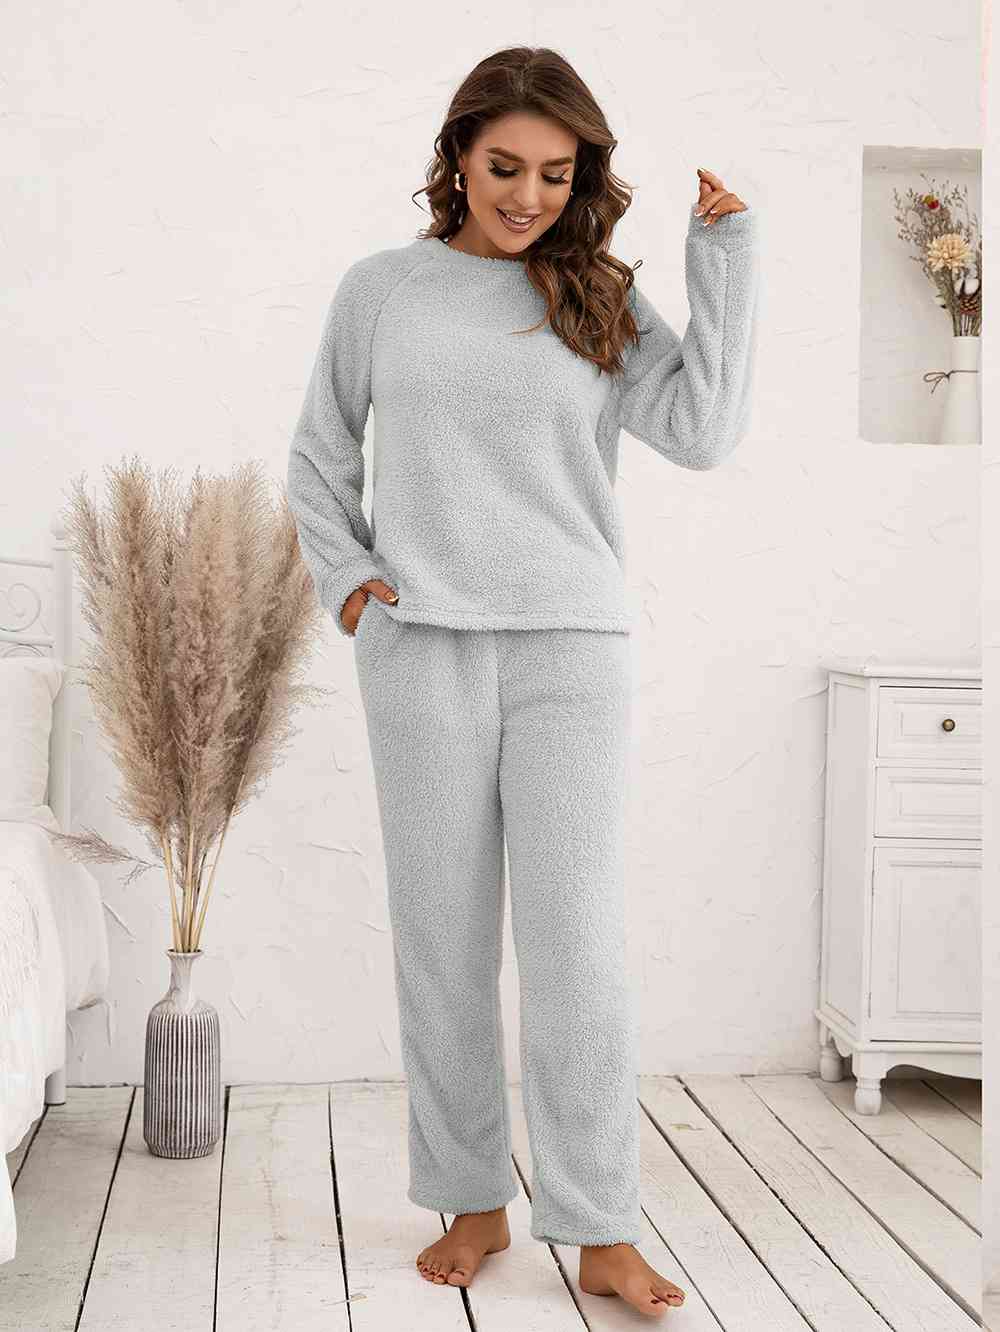 Teddy Long Sleeve Top and Pants Lounge Set (9 Colors) Loungewear Krazy Heart Designs Boutique Light Gray S 